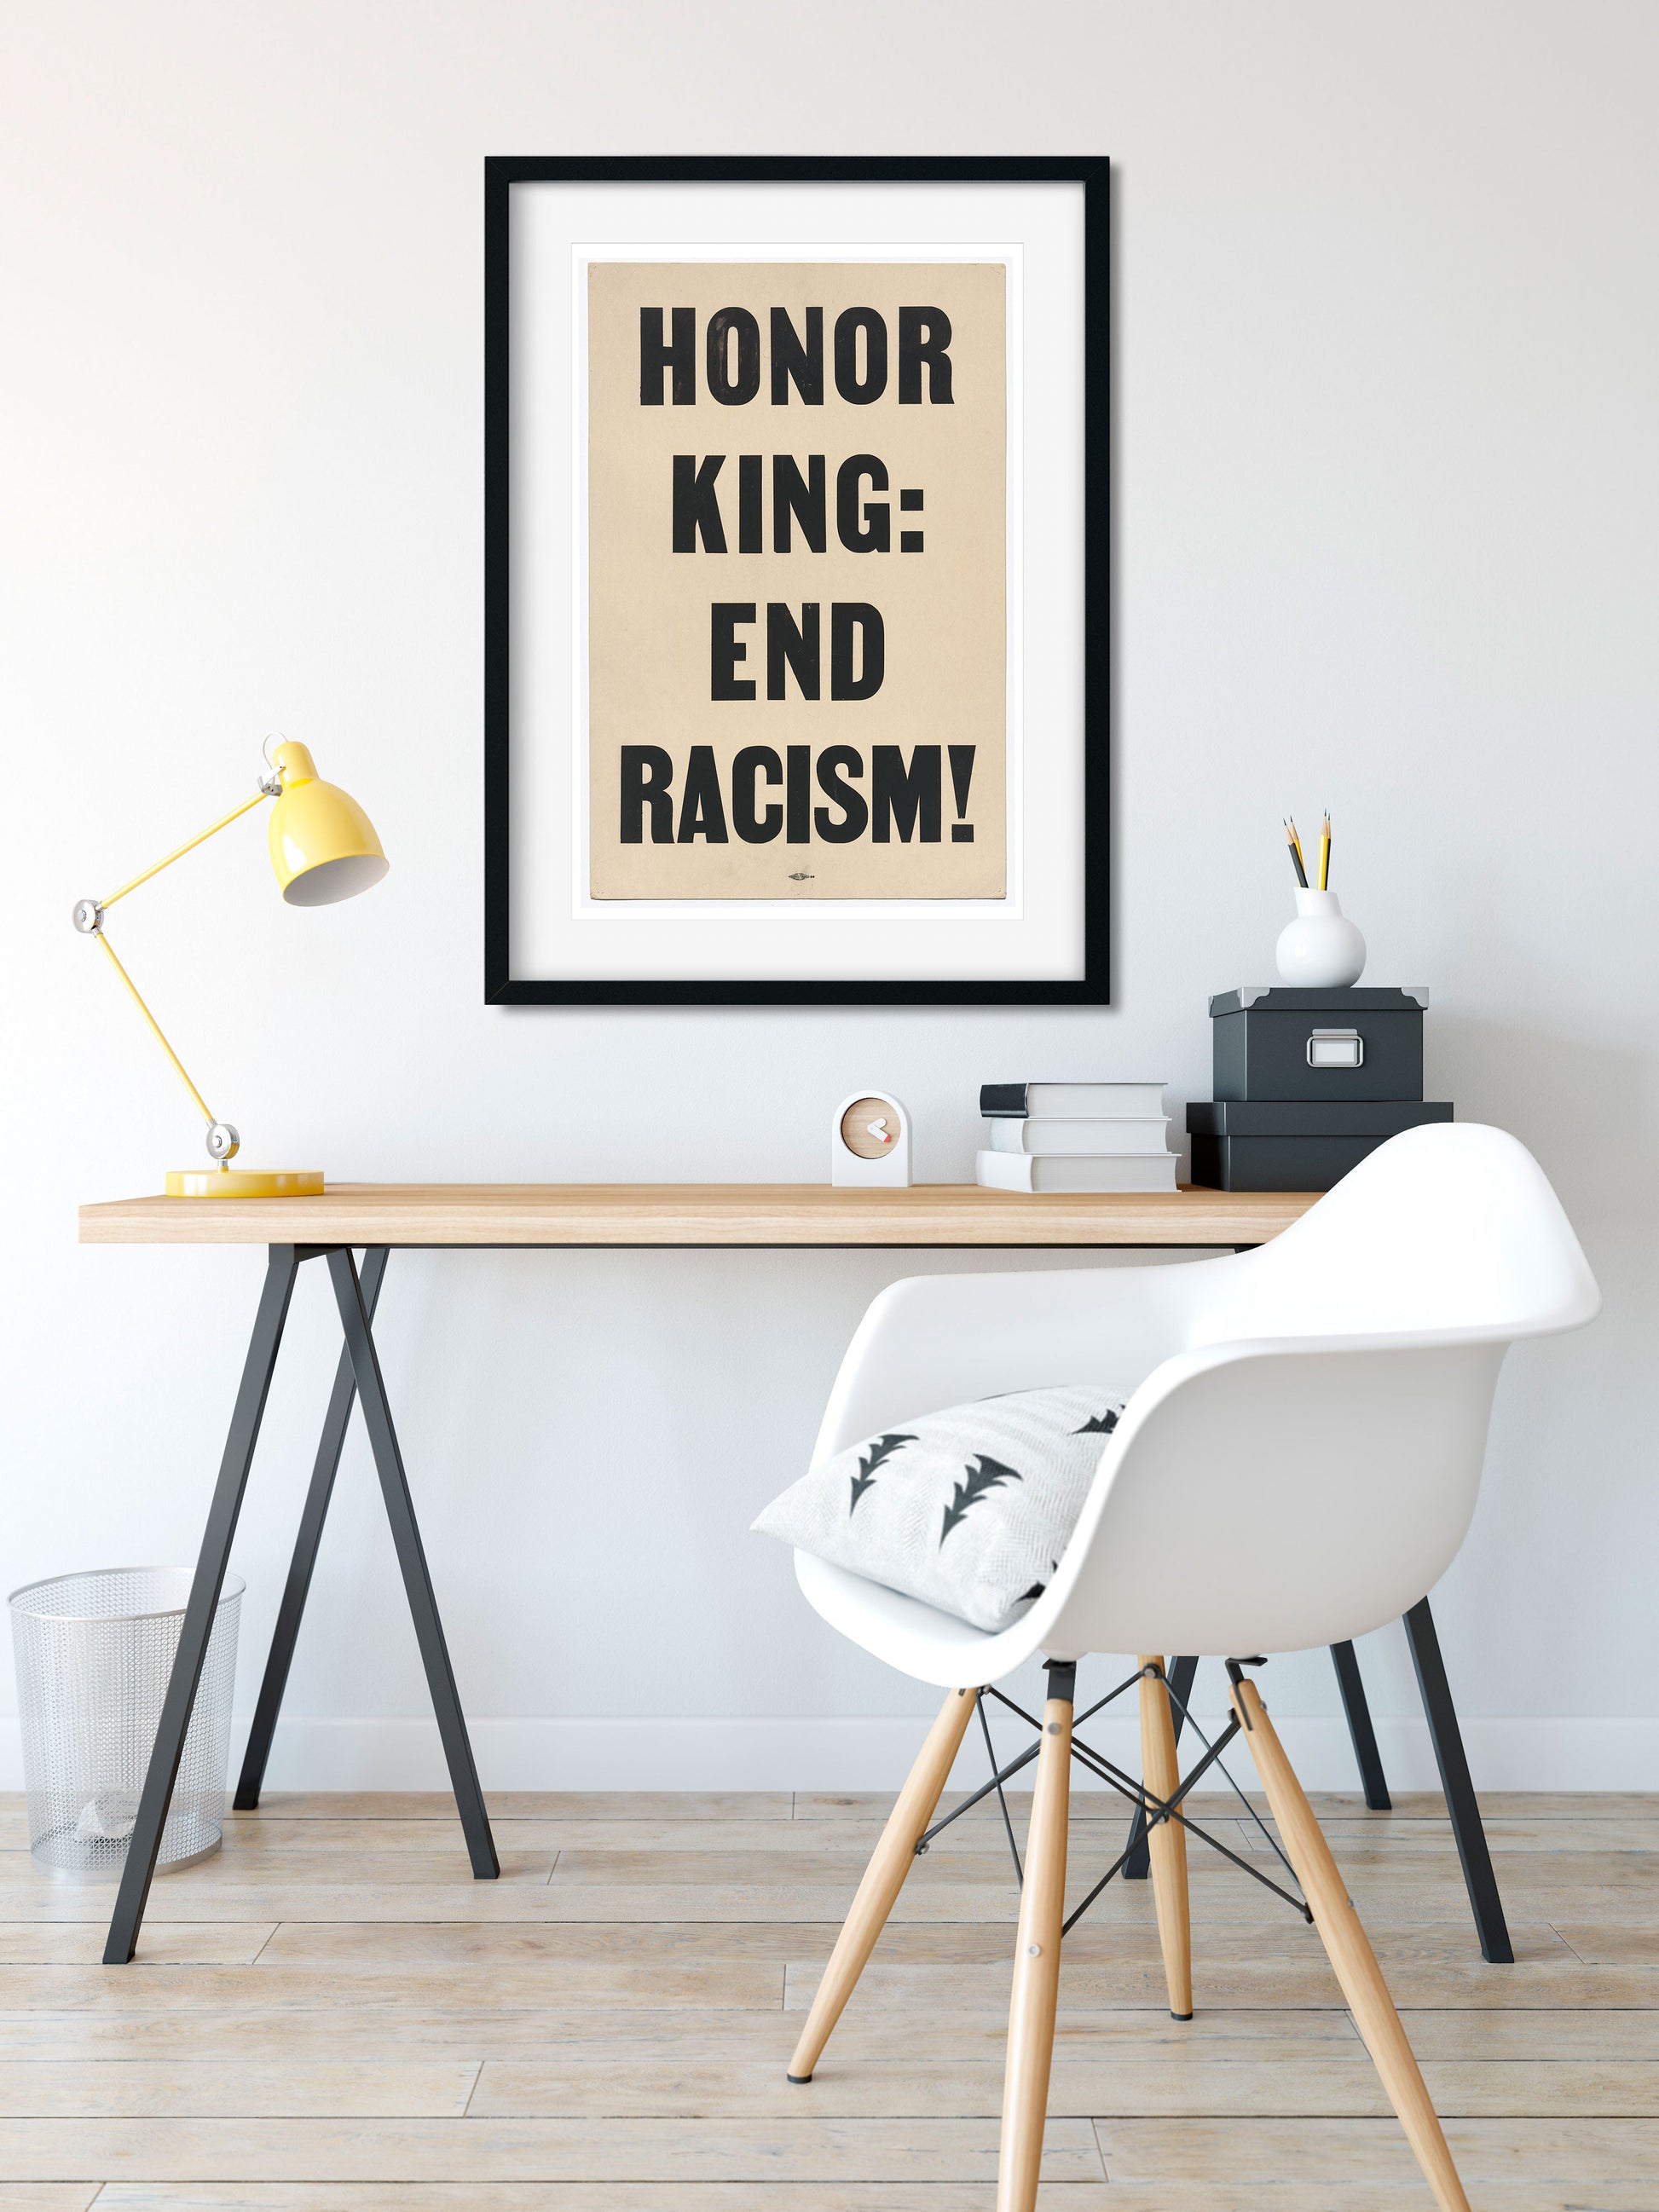 Honor King End Racism Social Justice Poster art hanging above a desk in an office - Transit Design